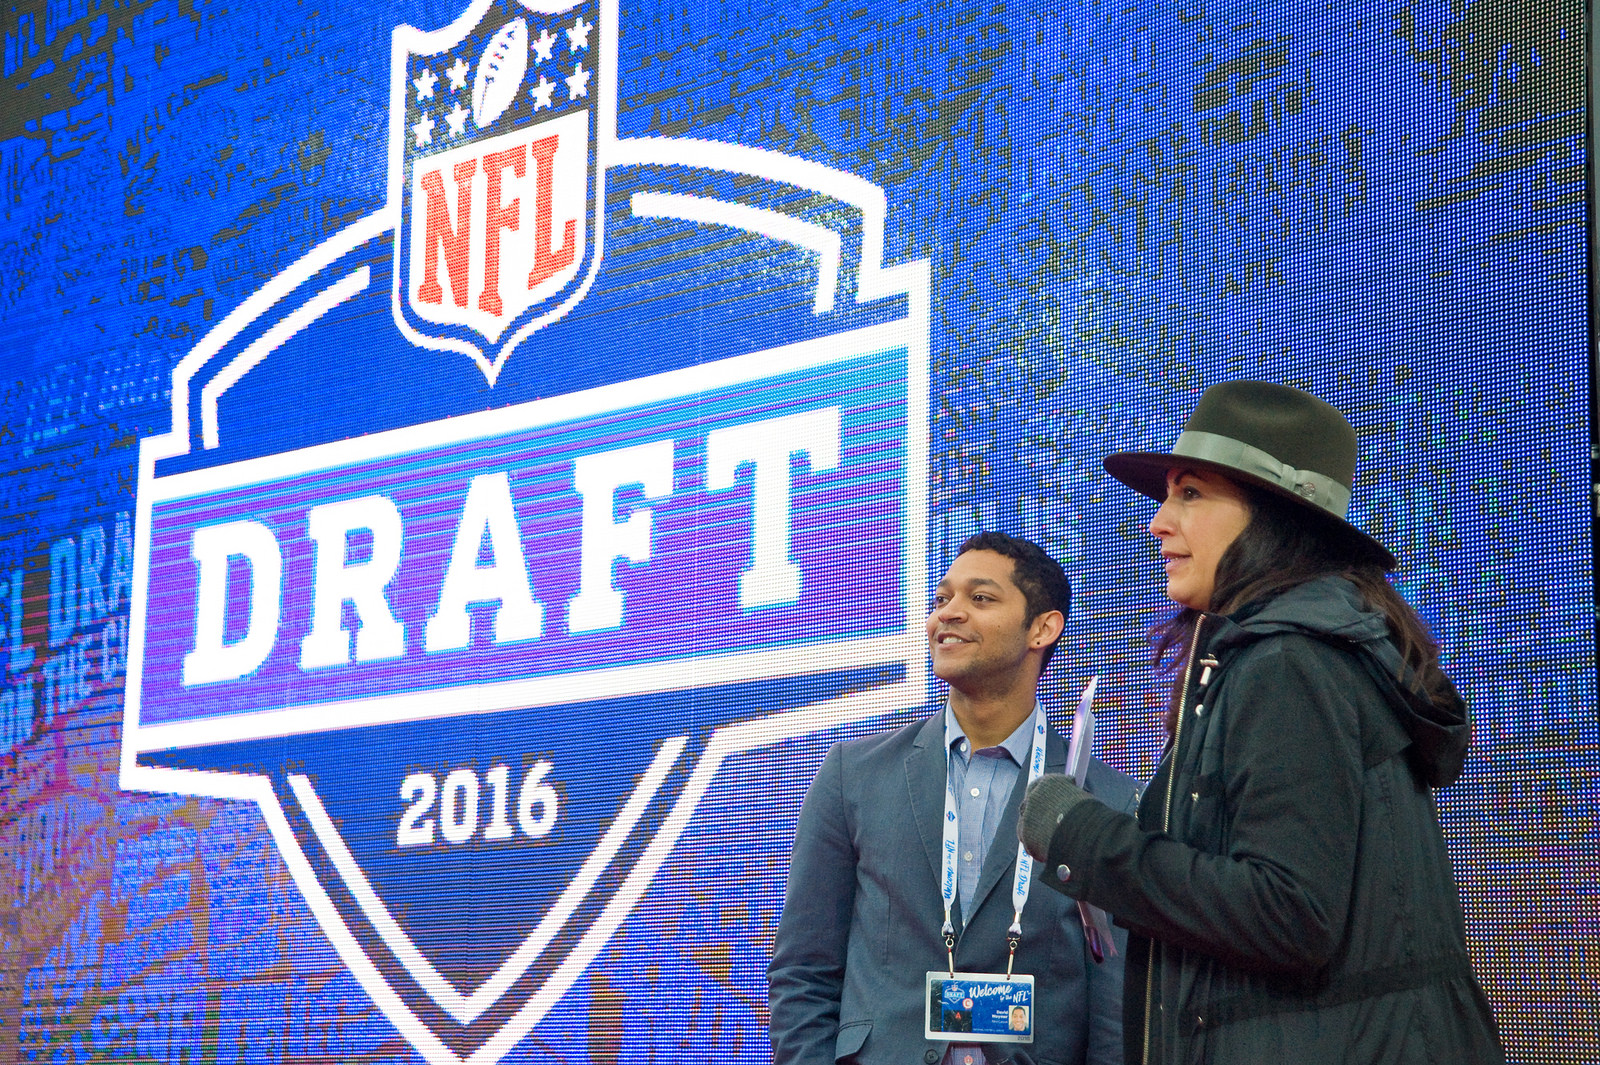 Graduate working for the NFL at the 2016 draft